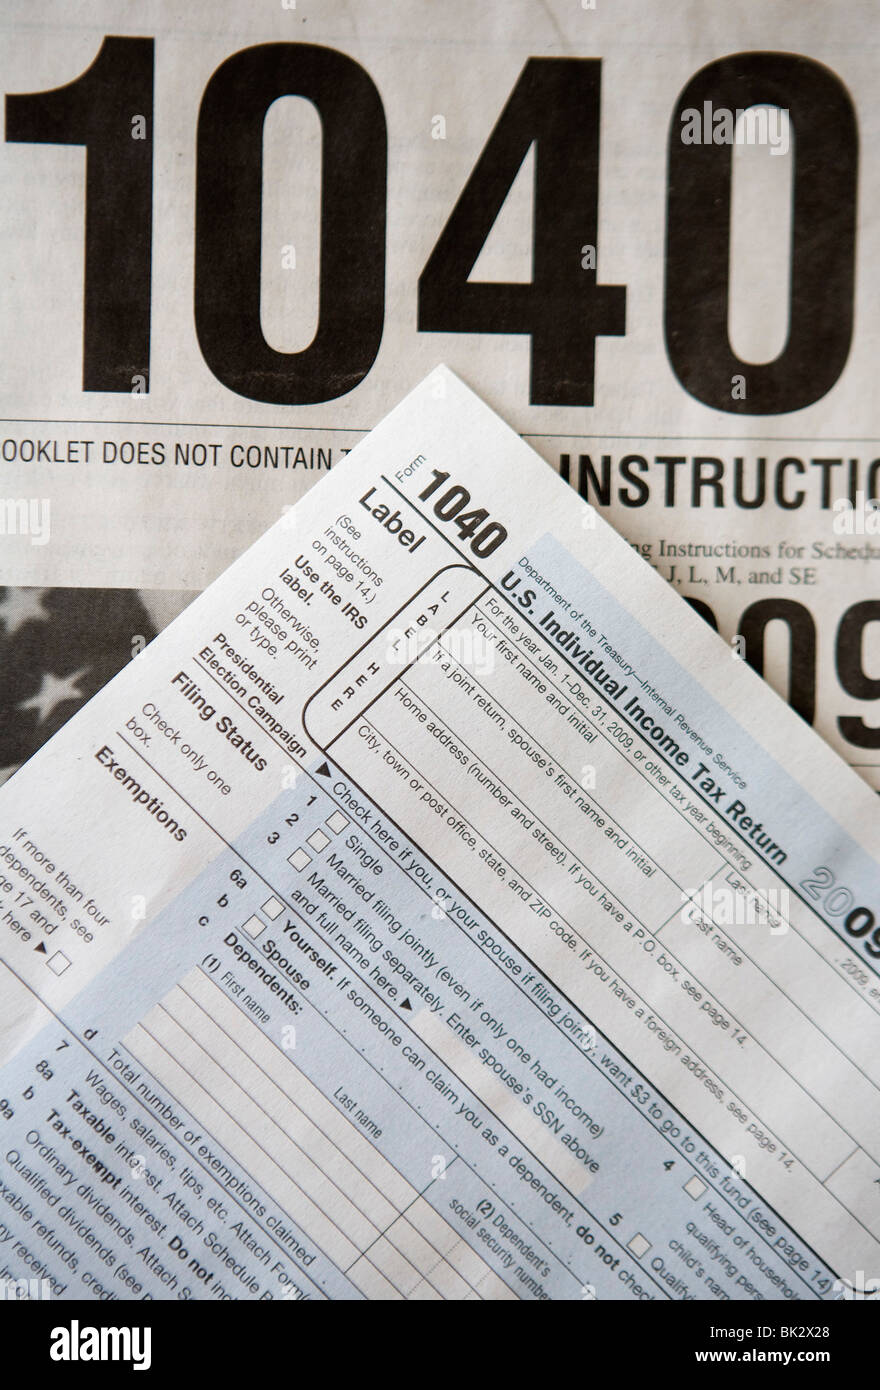 A United States Income Tax 1040 form. Stock Photo